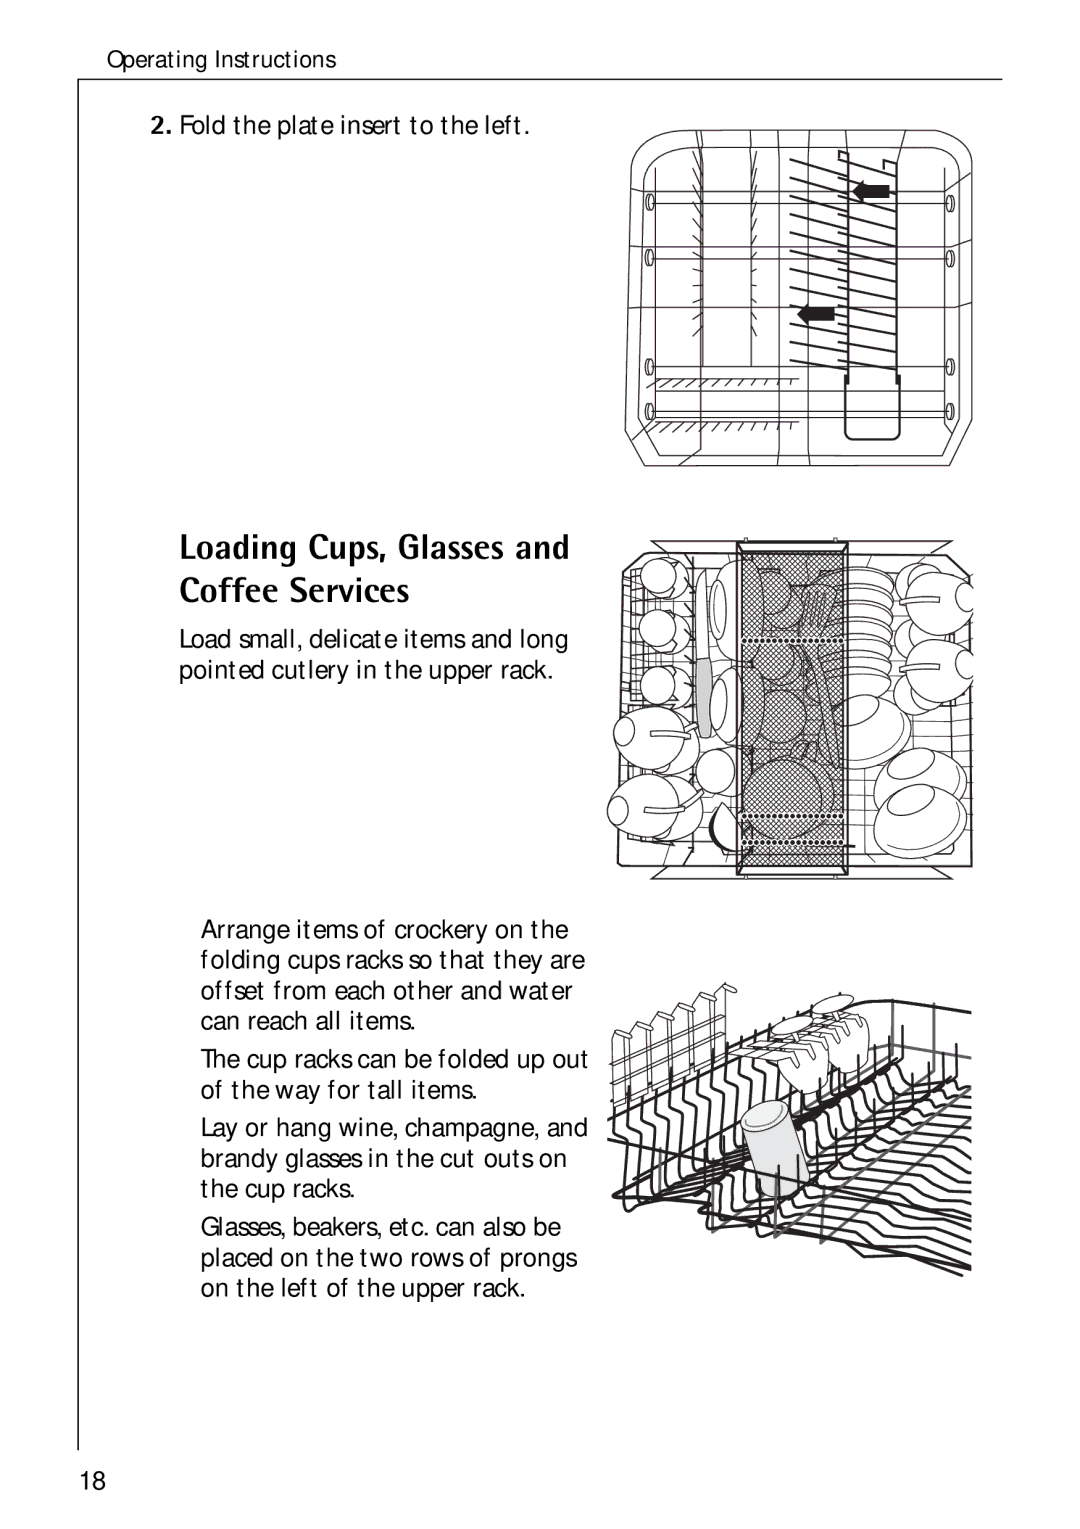 Electrolux 60750 VI manual Loading Cups, Glasses and Coffee Services, Fold the plate insert to the left 